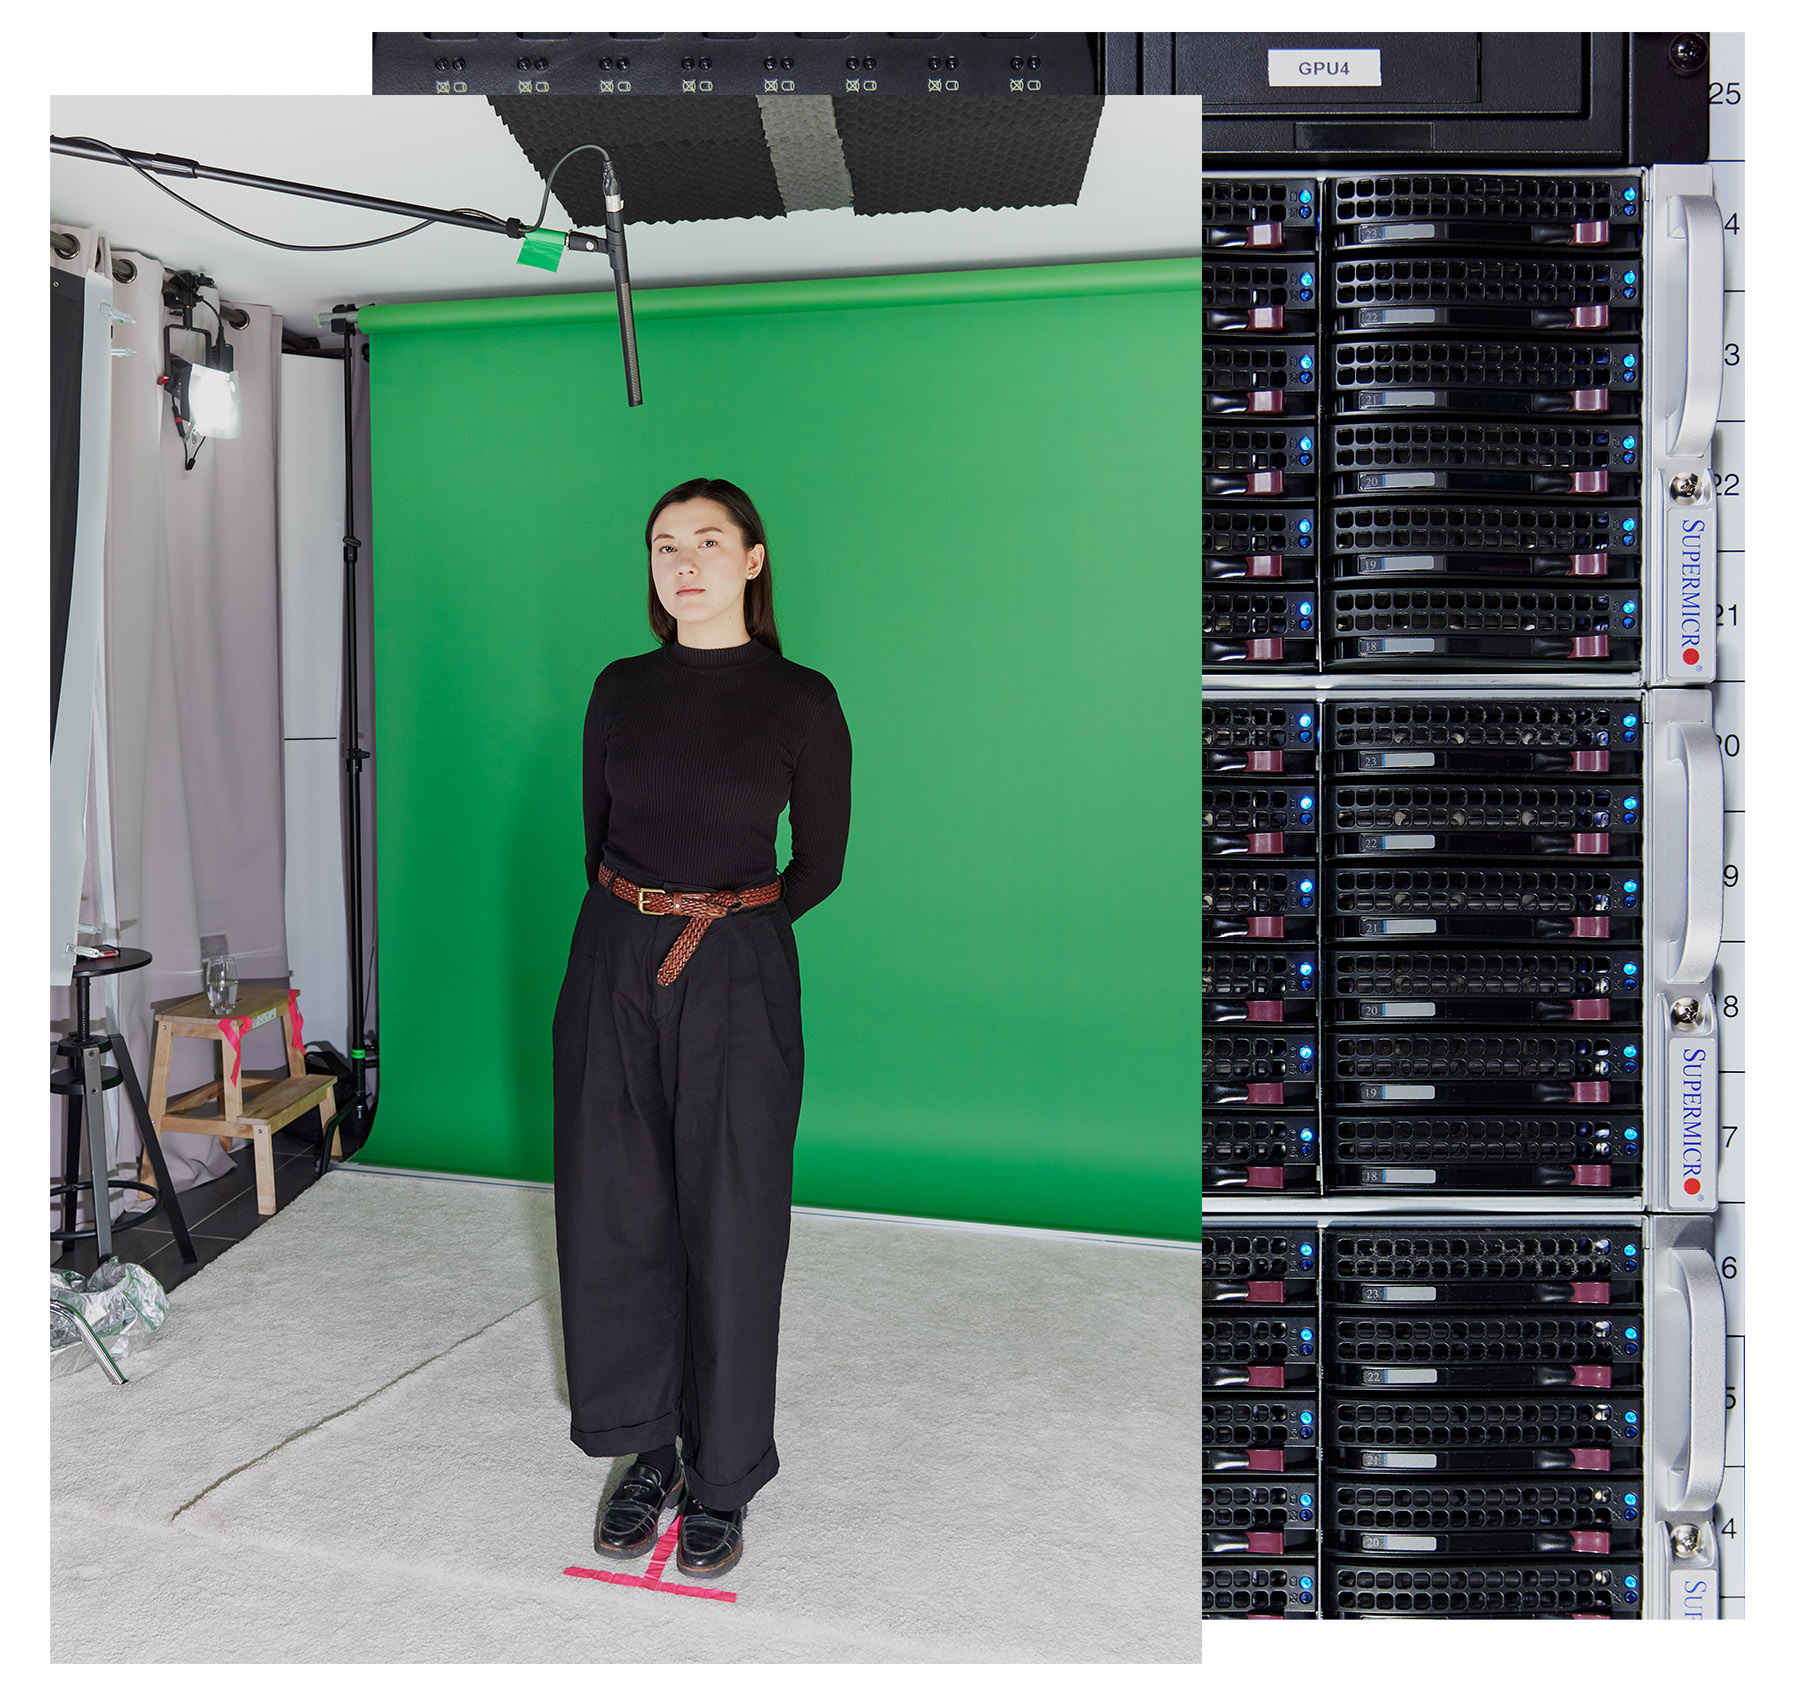 image of Melissa standing on her mark in front of a green screen with server racks in background image